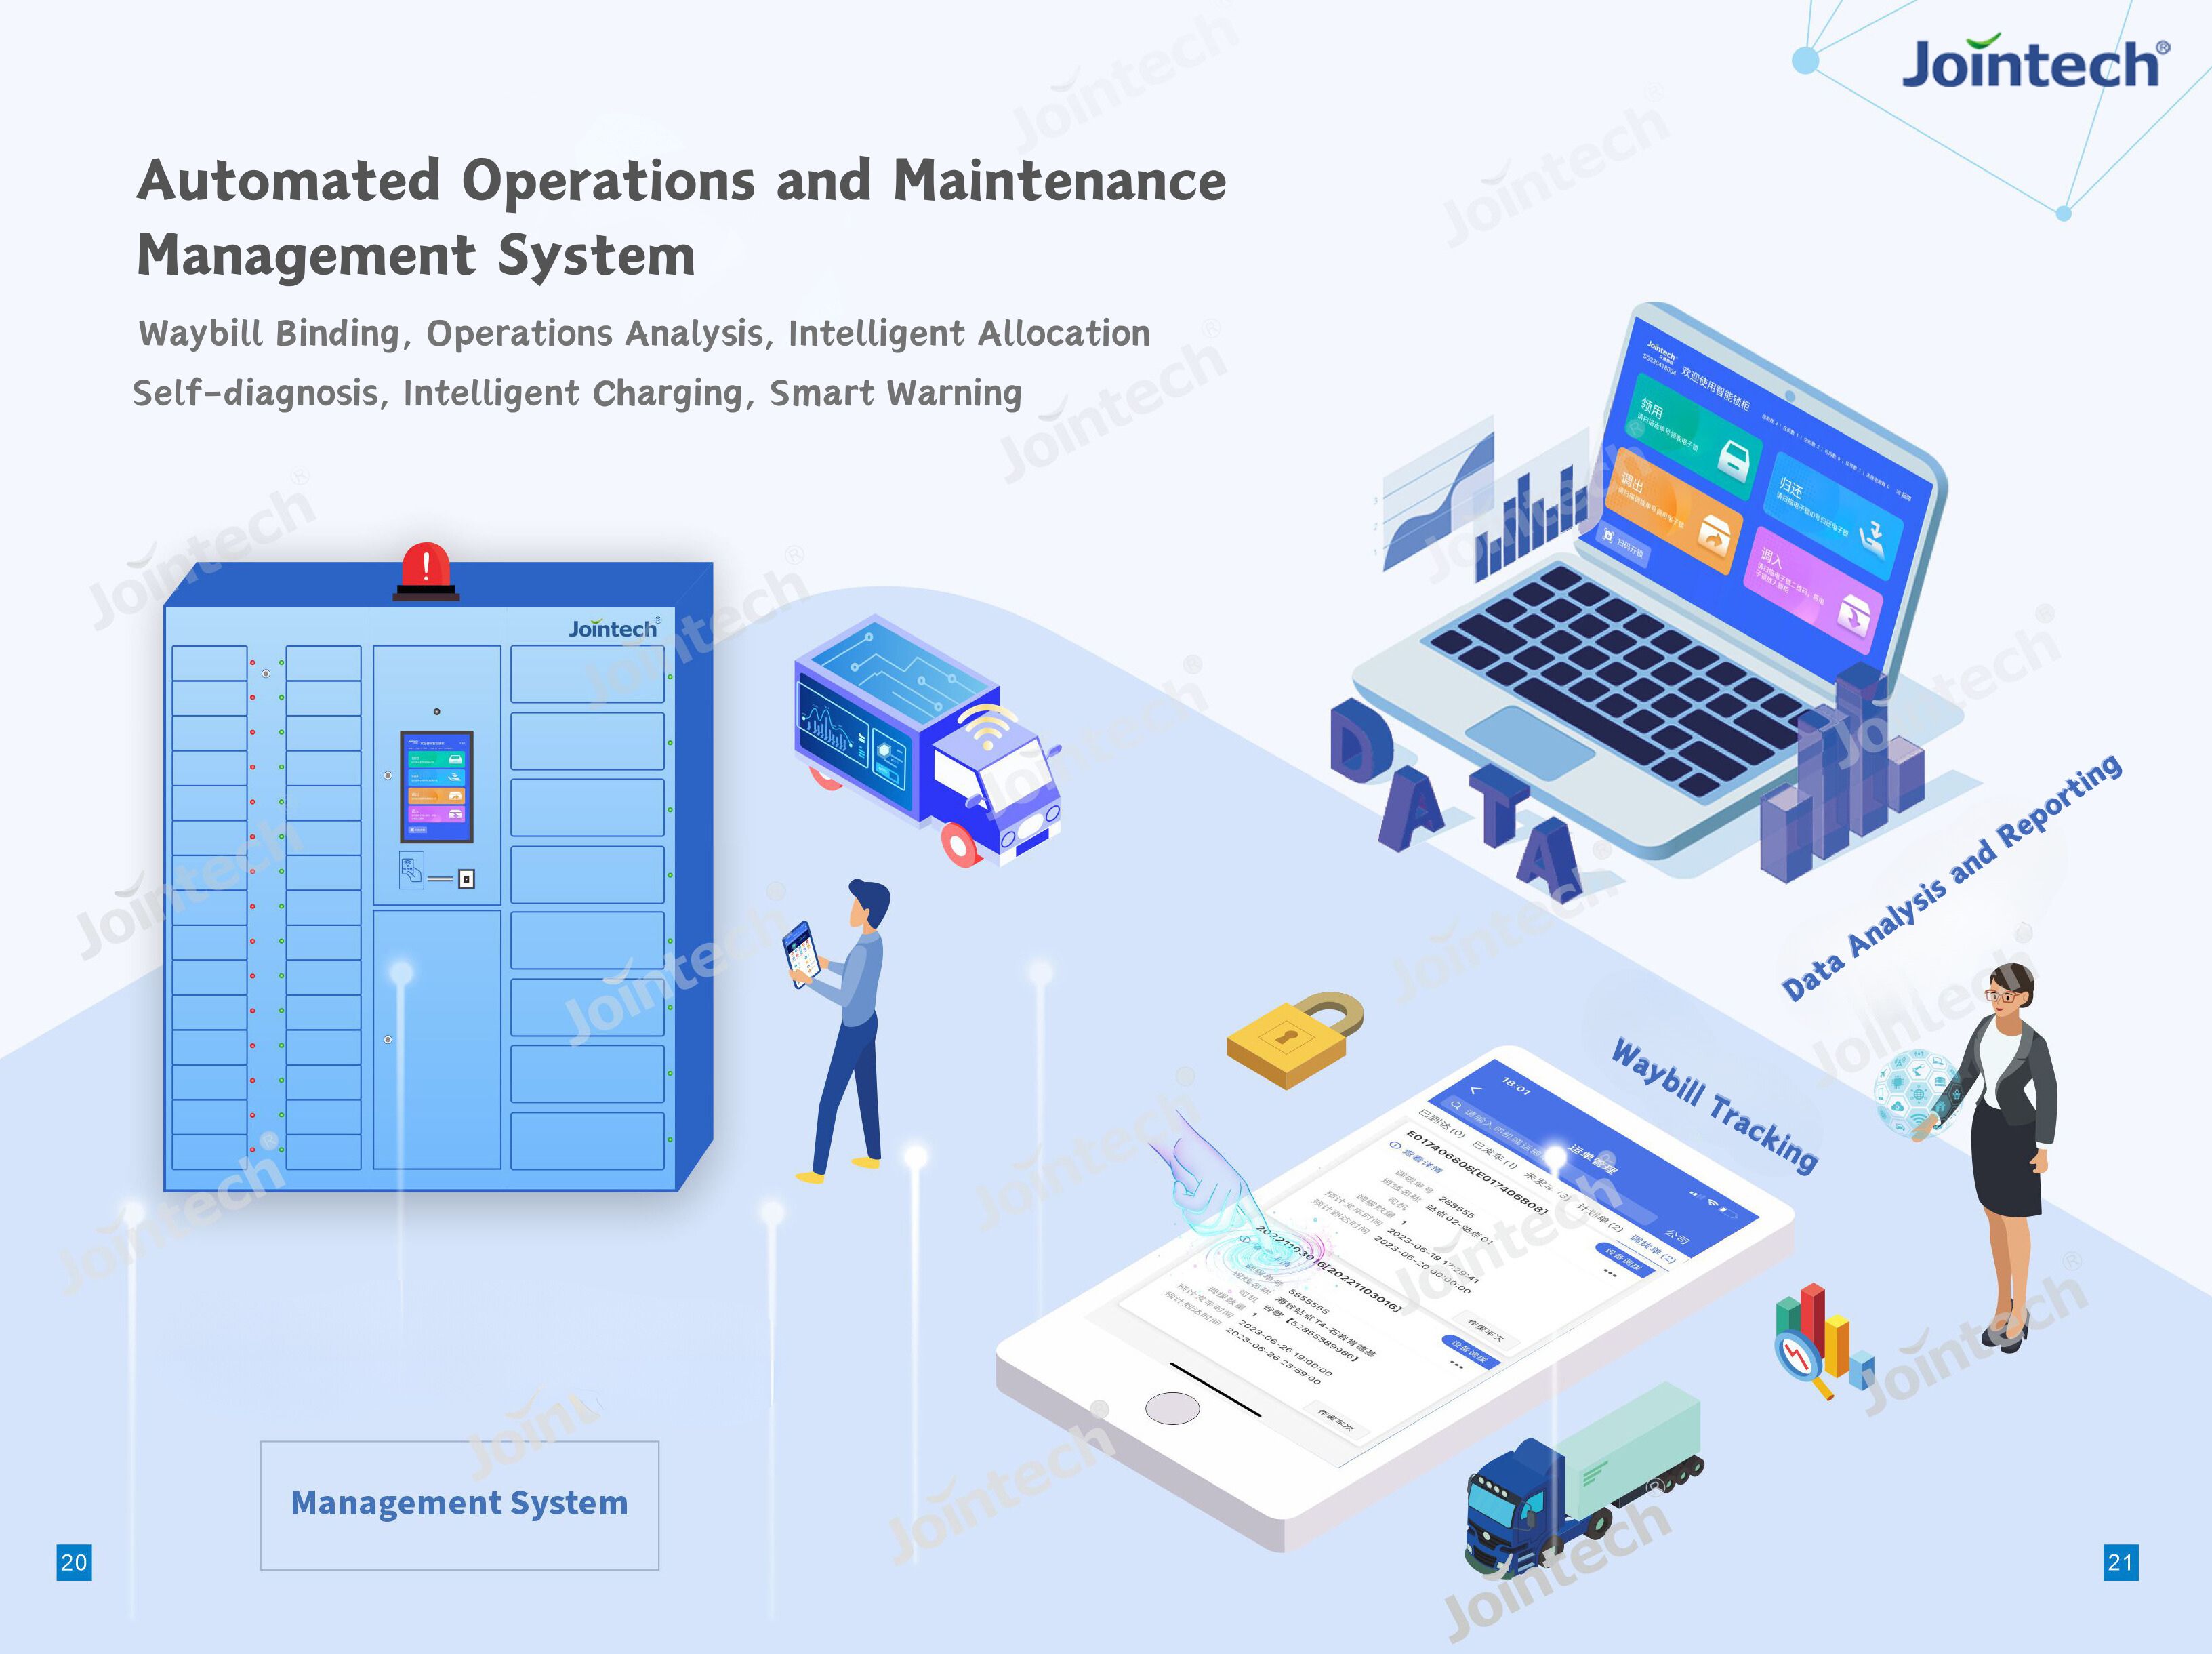 Jointech-Automated Operations and Maintenance Management System (2)